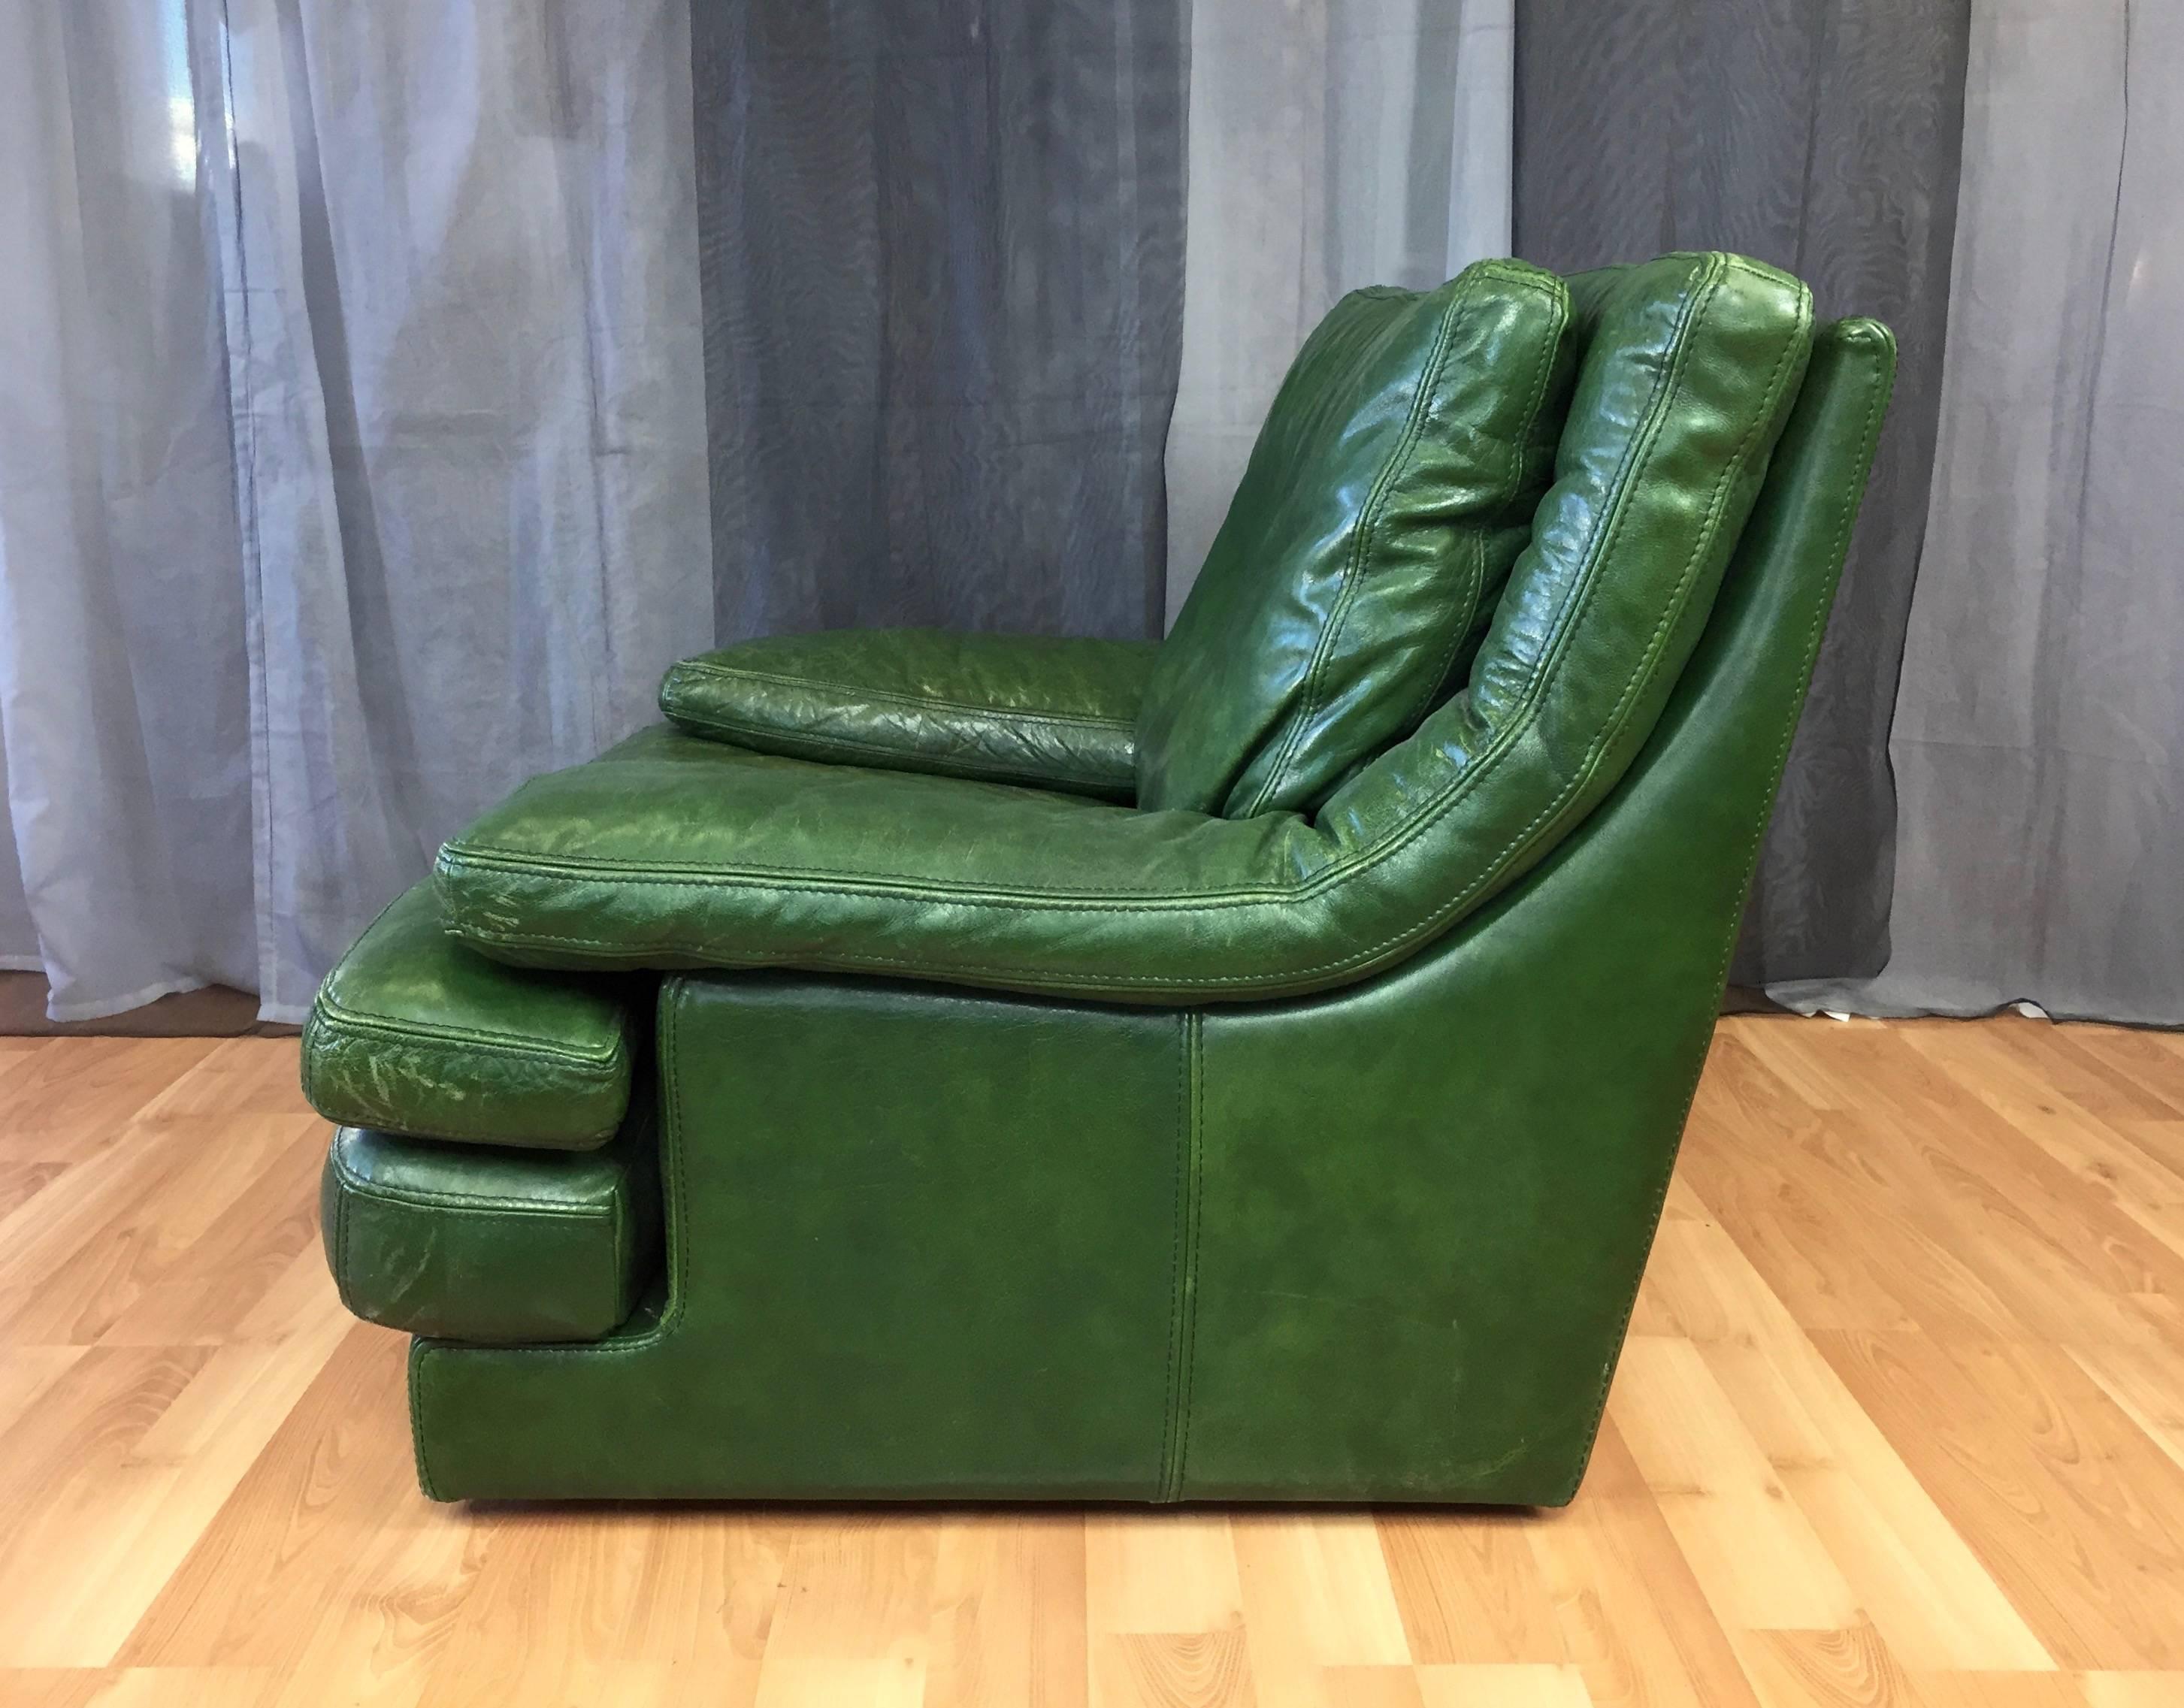 An oversized and extremely comfortable vintage Roche Bois leather lounge chair in British racing green. Stacked low profile base, seat cushions, and armrests present a casually modern design that’s very inviting. Extra-wide slab arms curve